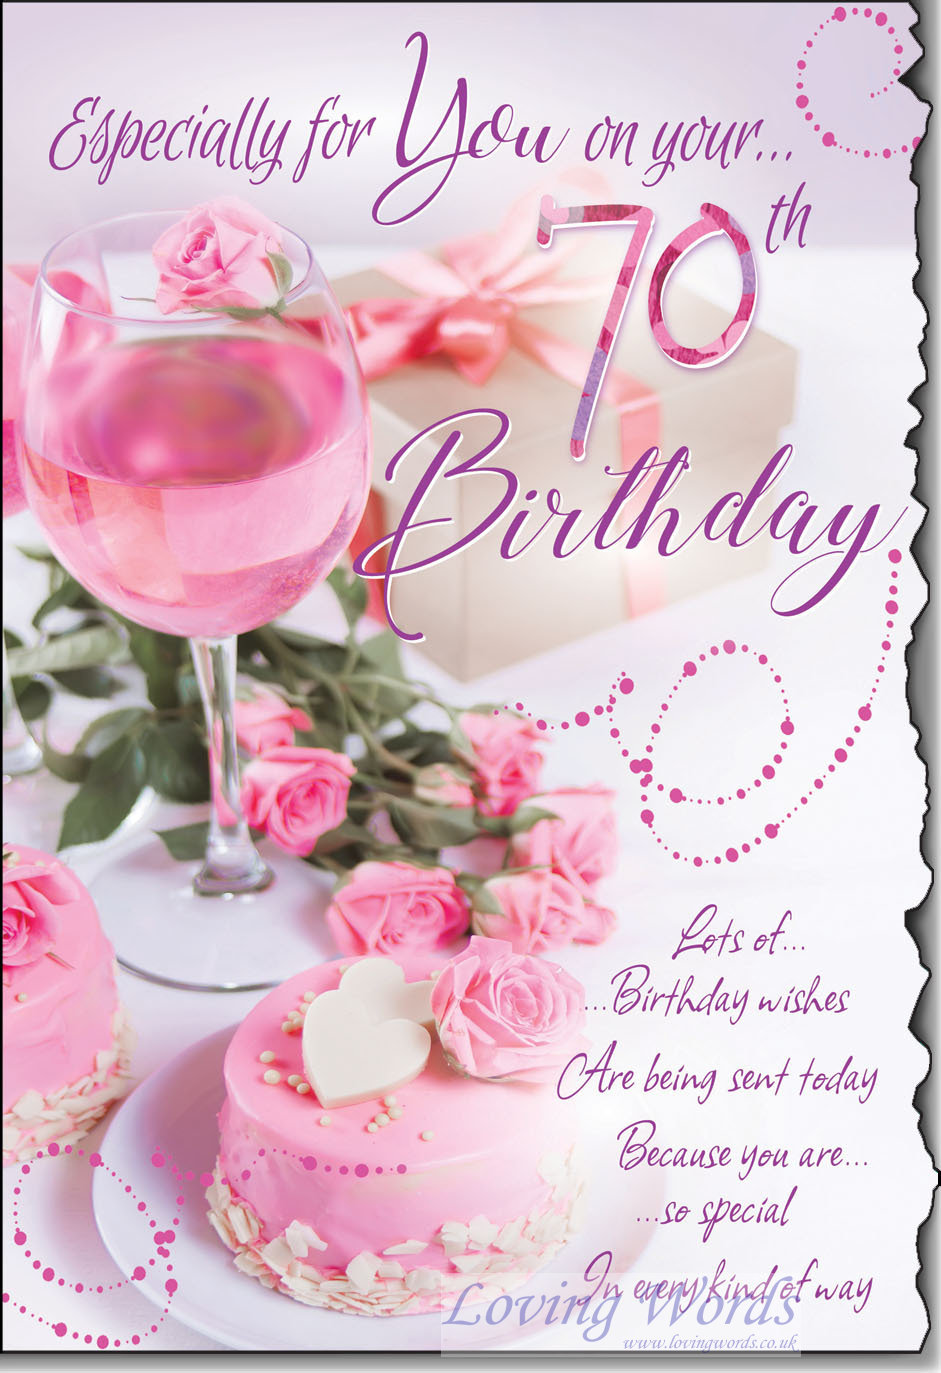 for-my-husband-on-your-70th-birthday-card-5034695767806-ebay-70th